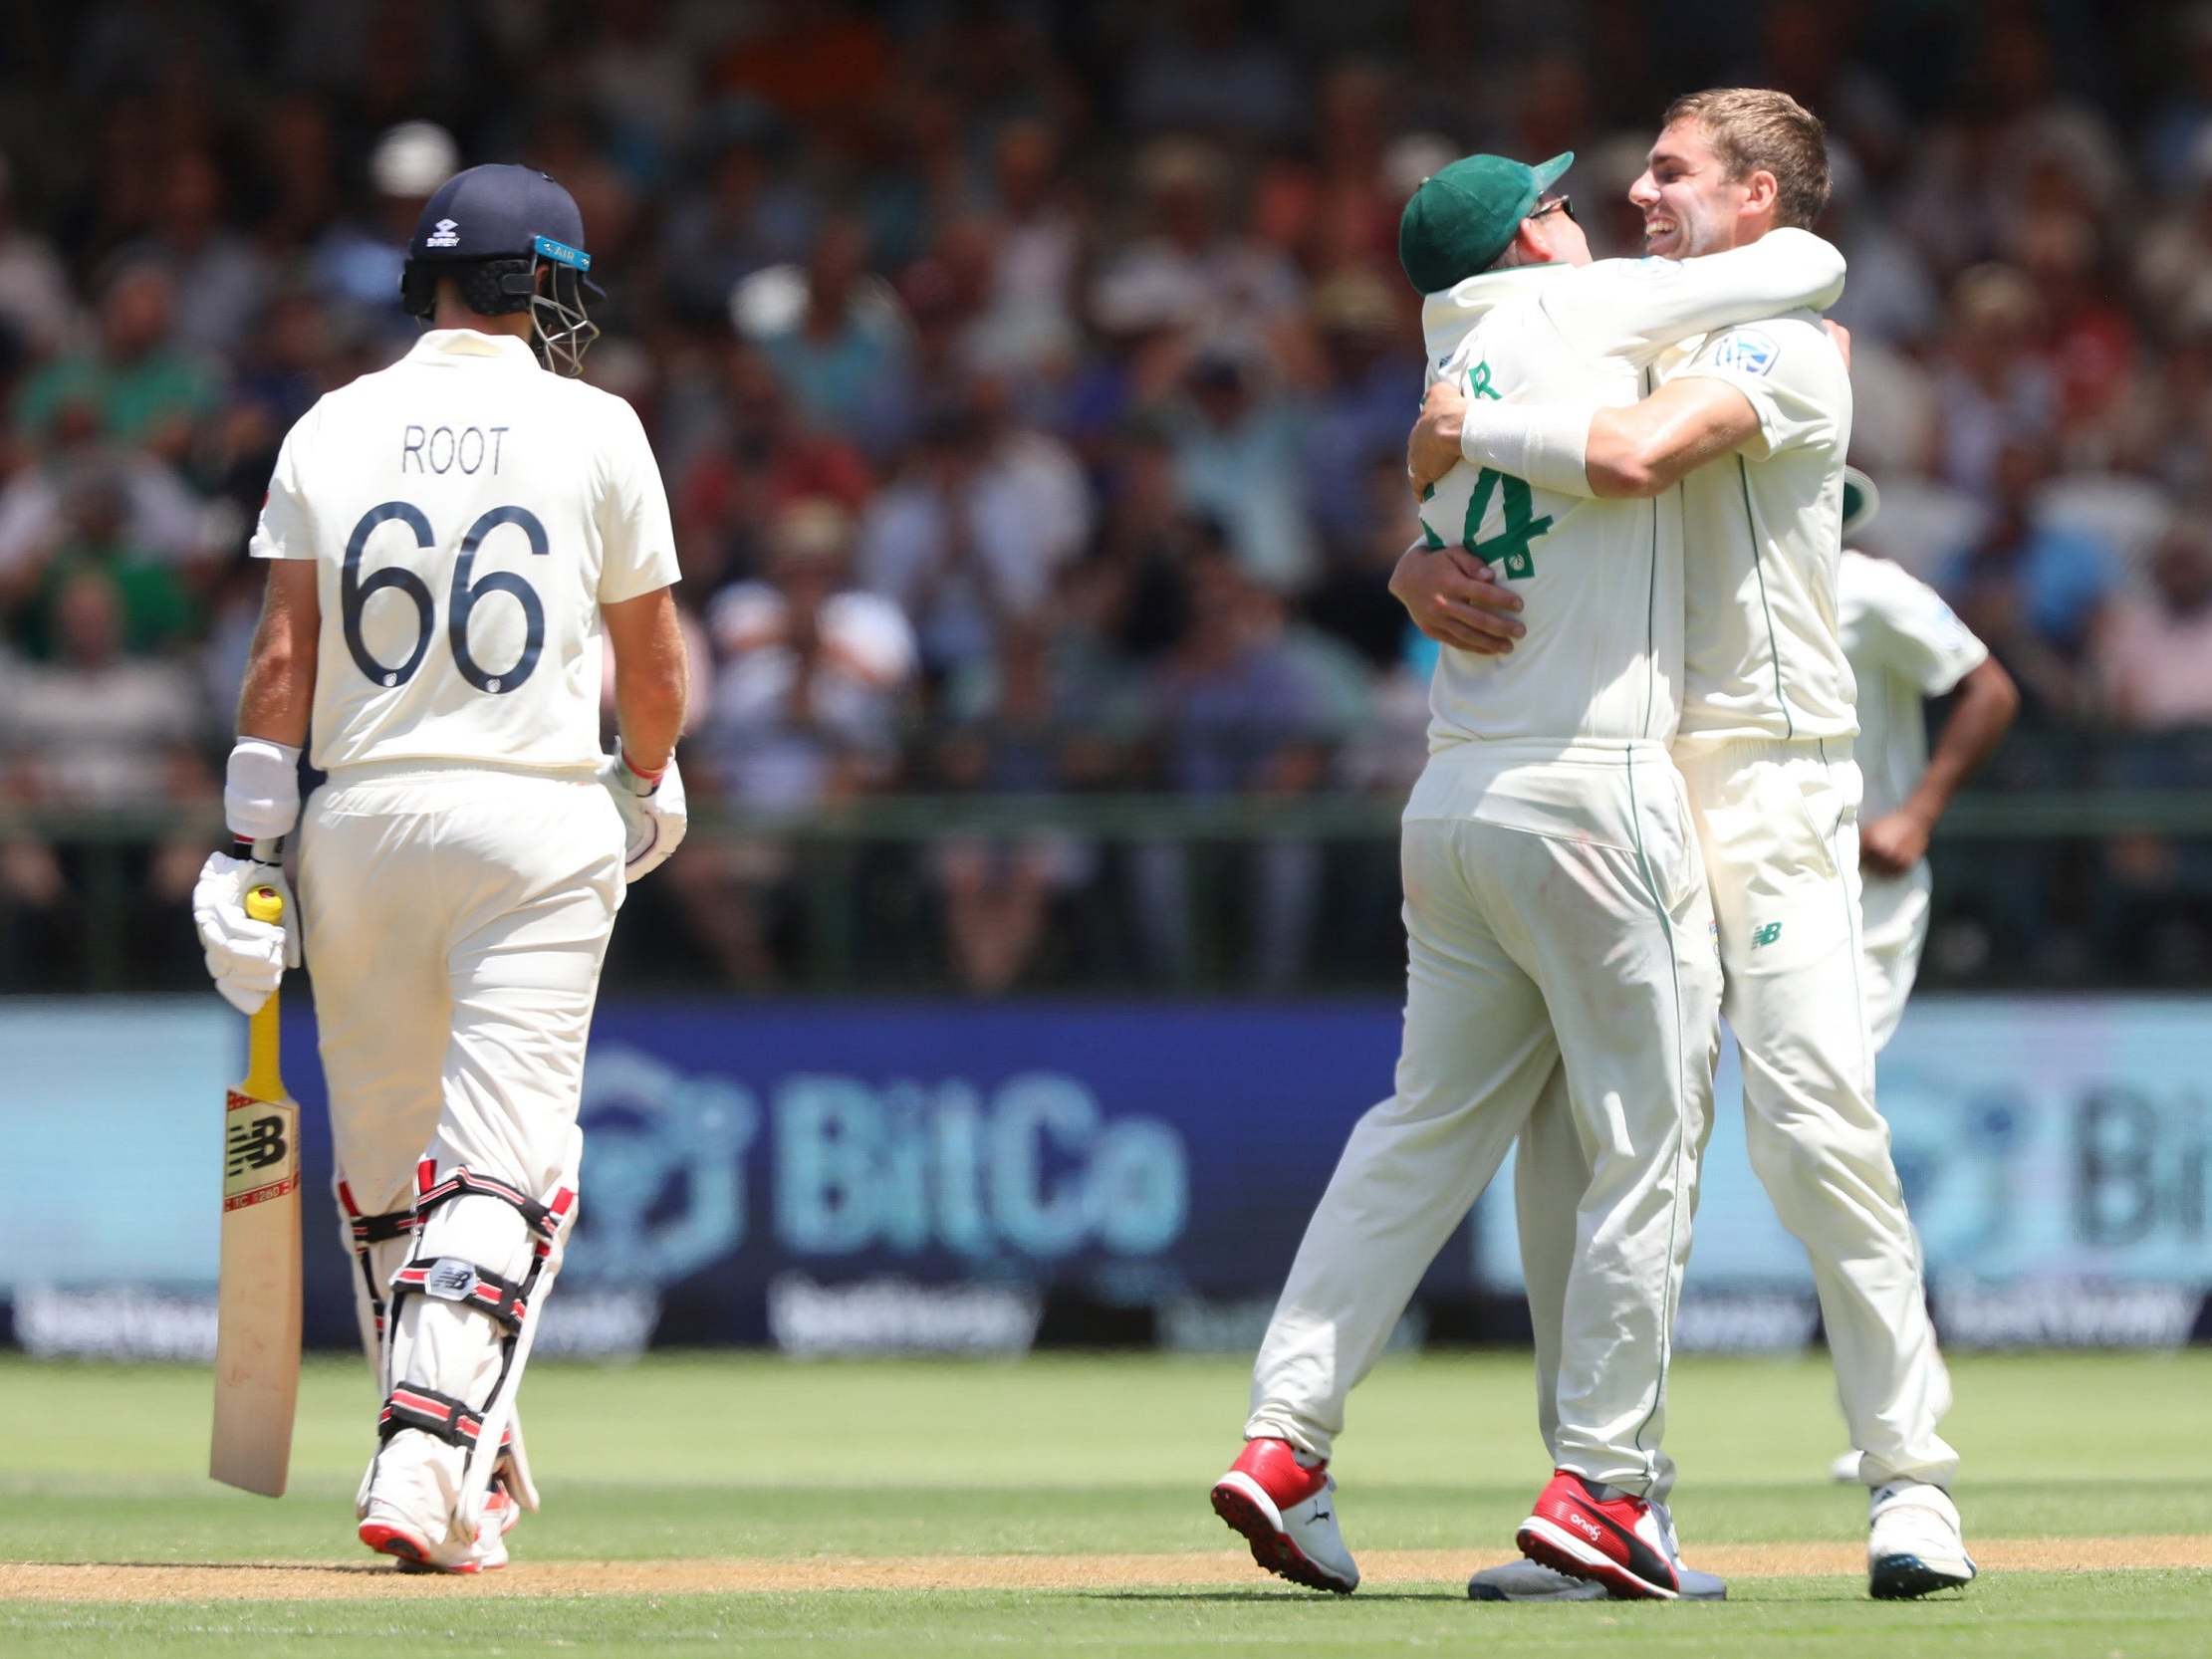 England’s batsmen failed to capitalise on starts on day one in Cape Town